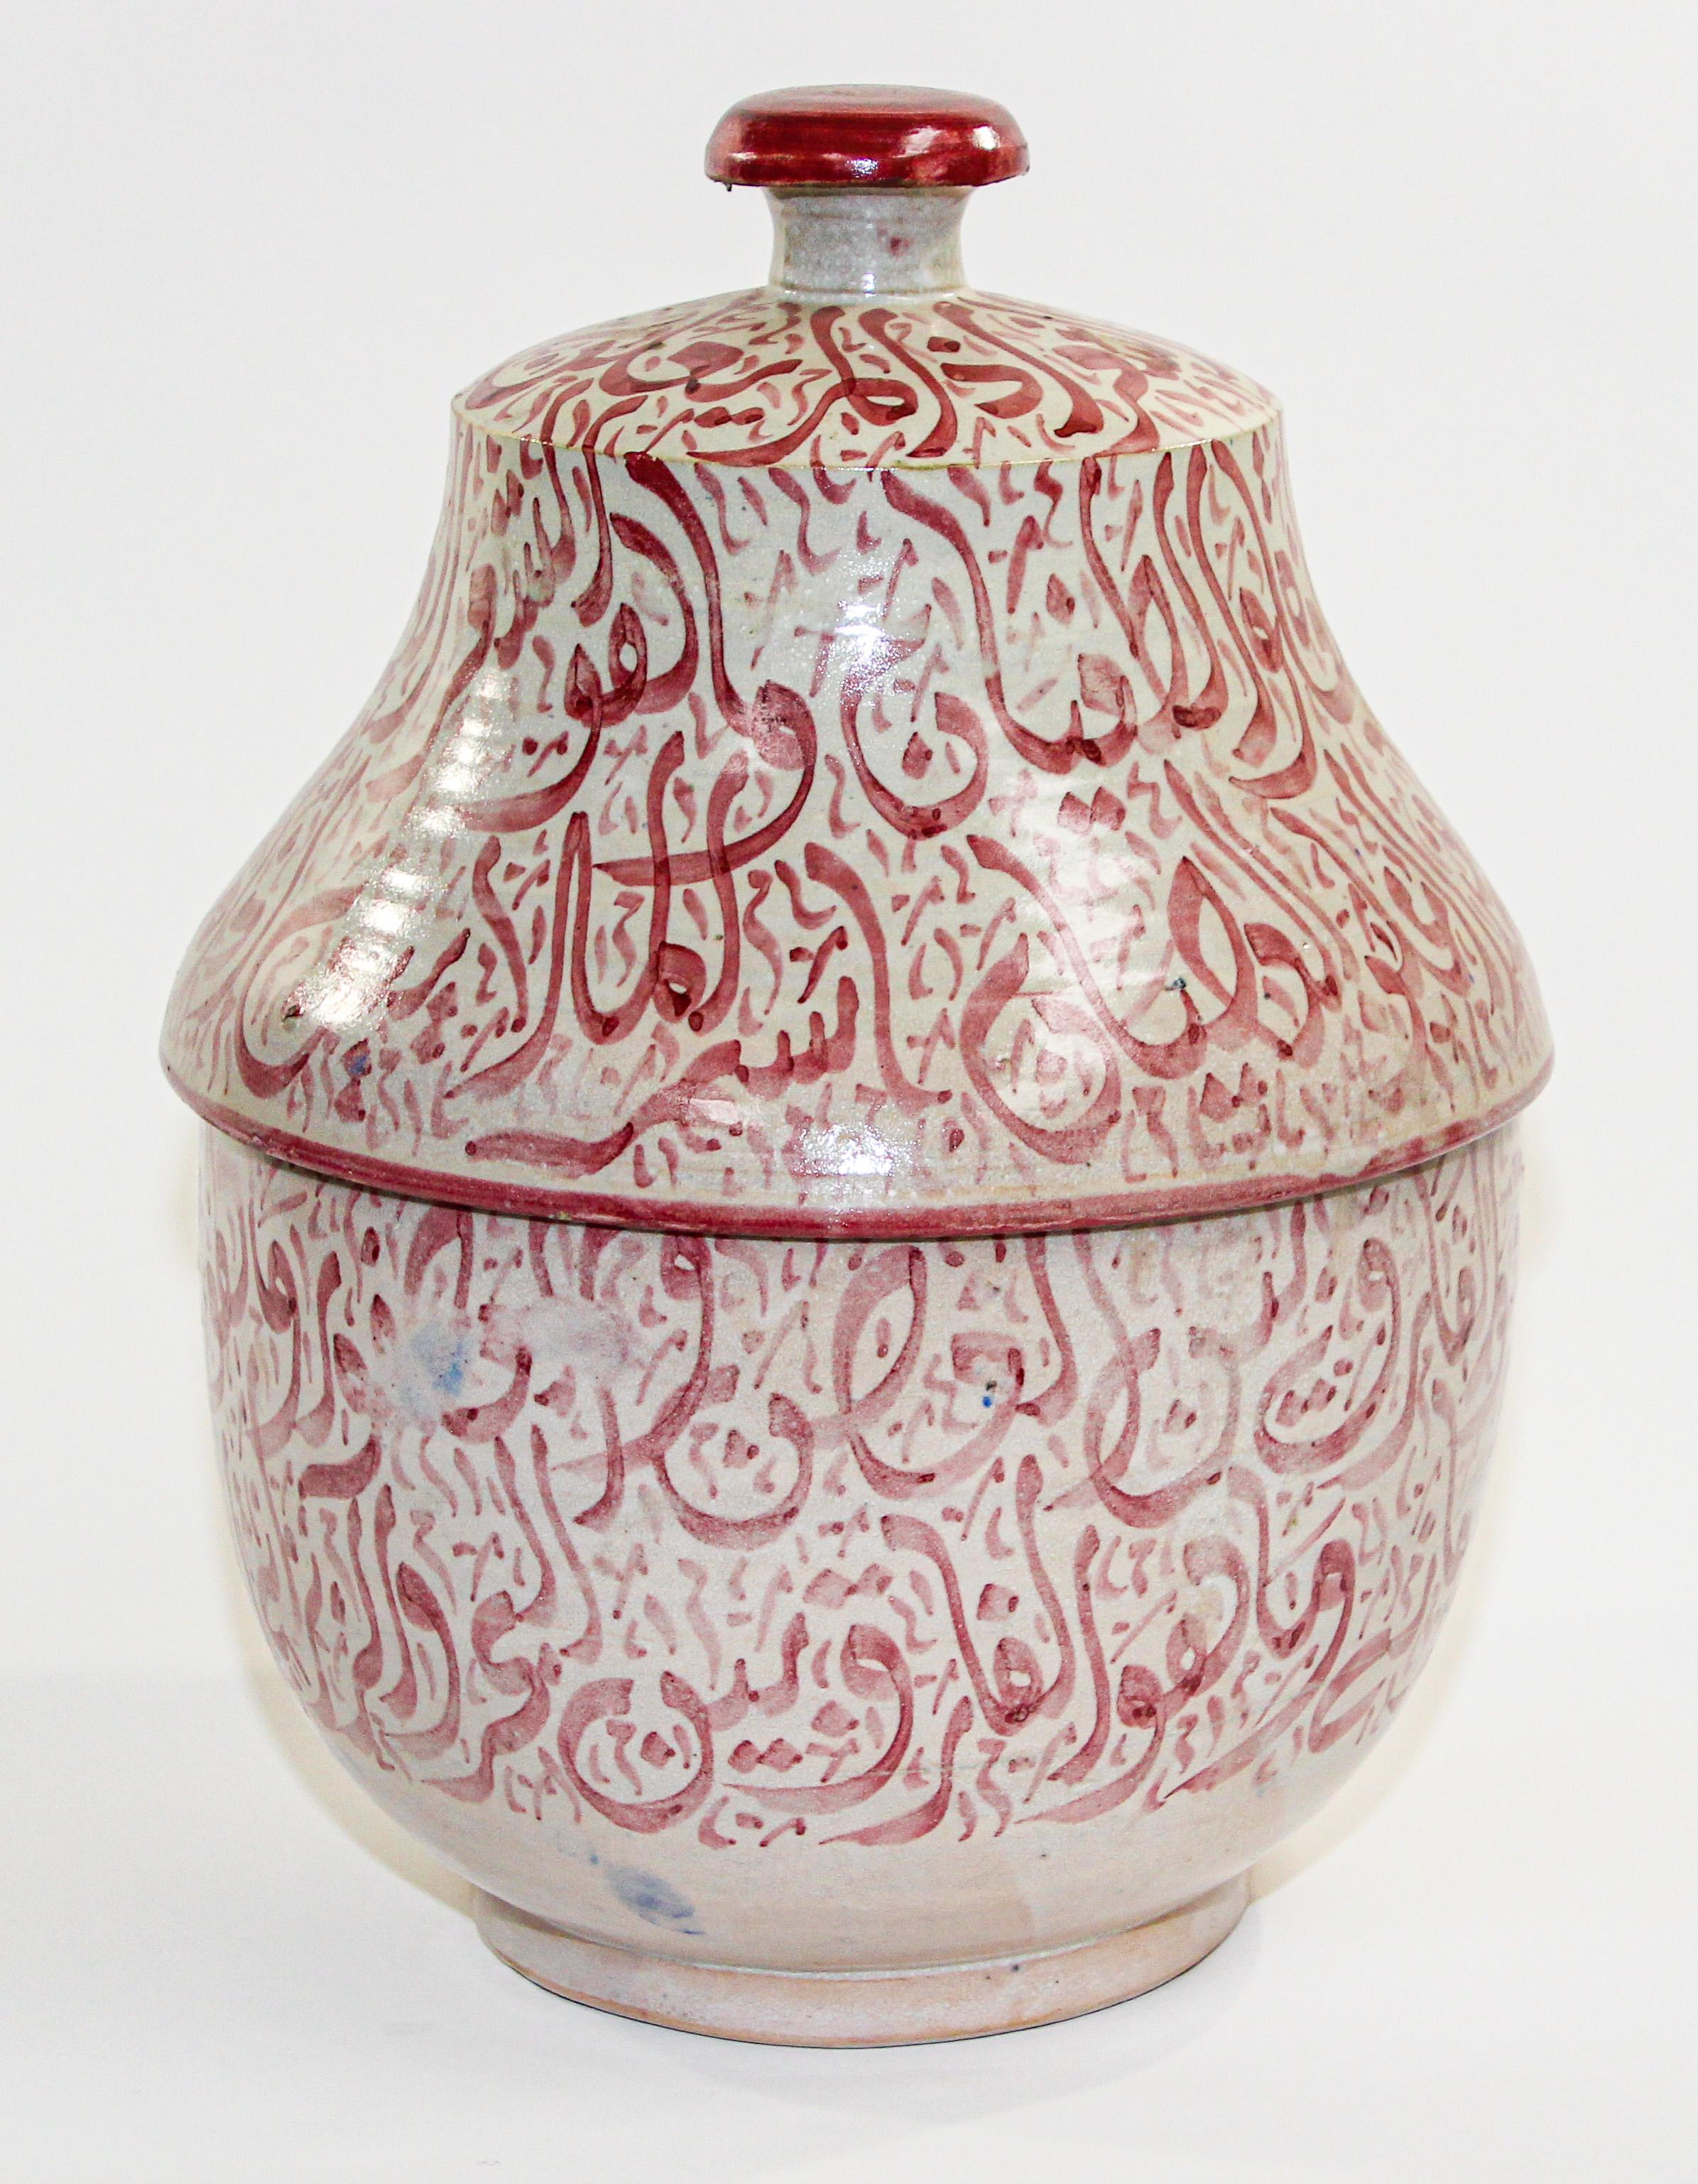 Hand-Crafted Moroccan Ceramic Lidded Urn from Fez with Arabic Calligraphy Pink Writing For Sale